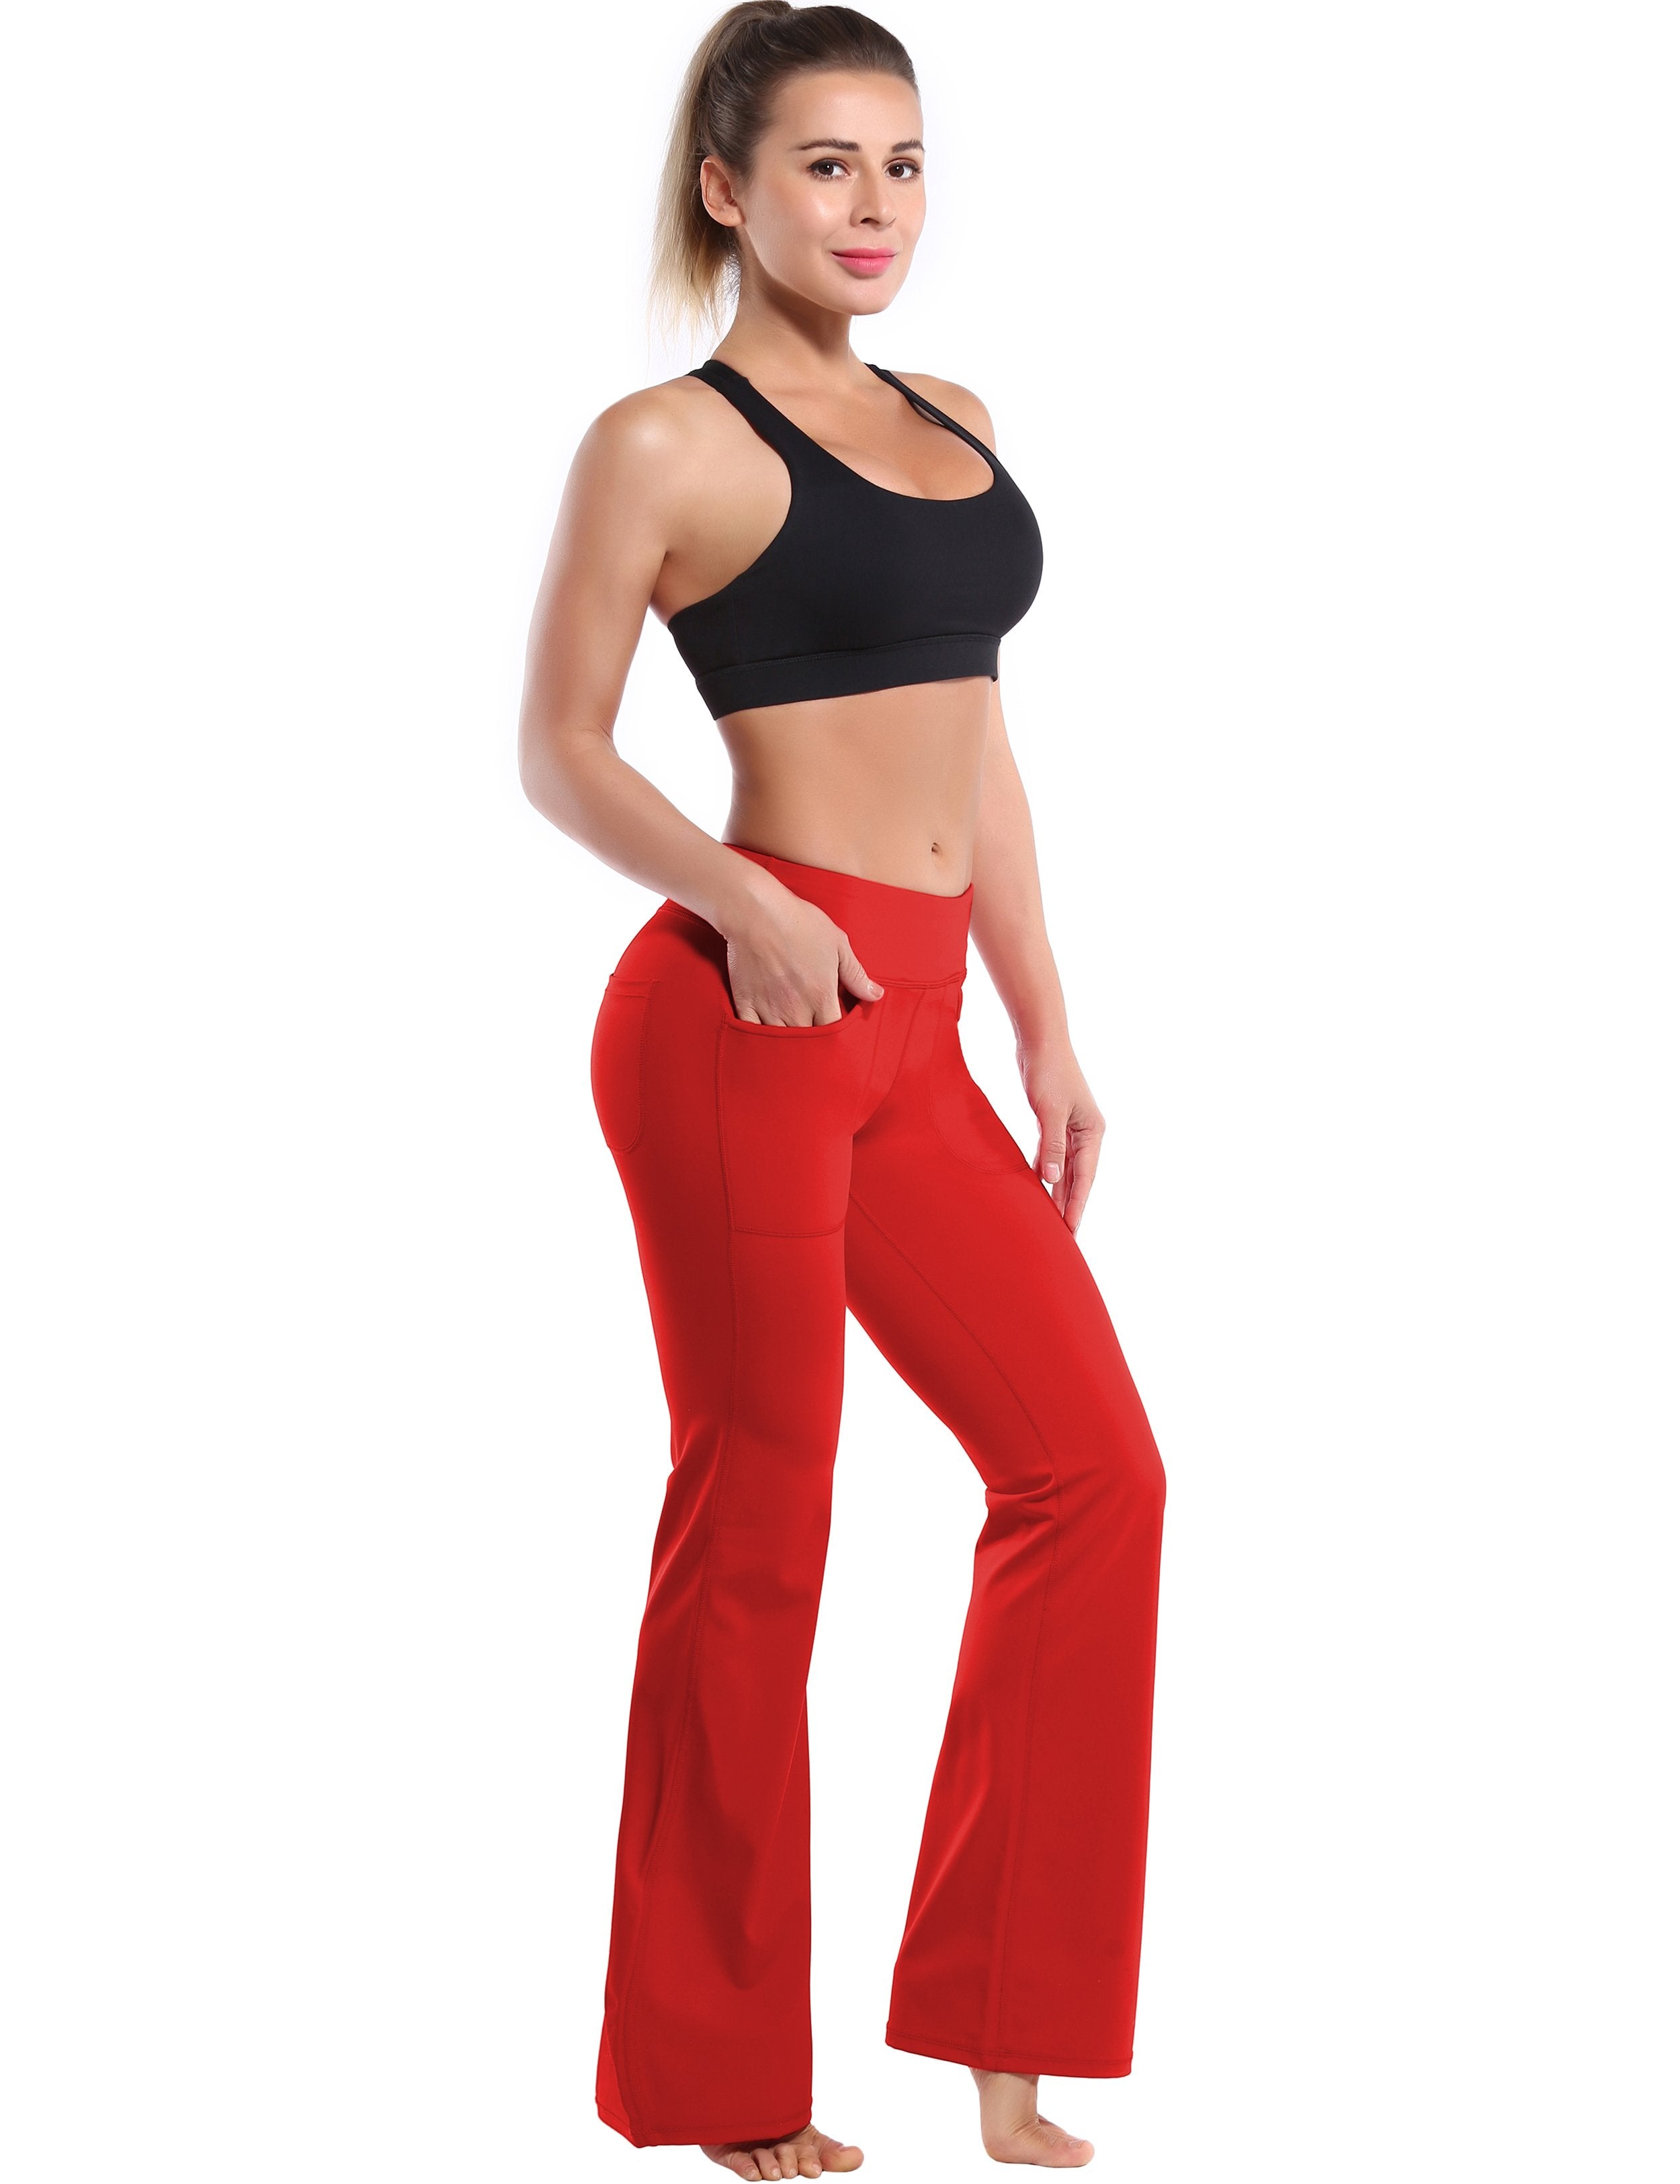 4 Pockets Bootcut Leggings scarlet 75%Nylon/25%Spandex Fabric doesn't attract lint easily 4-way stretch No see-through Moisture-wicking Inner pocket Four lengths